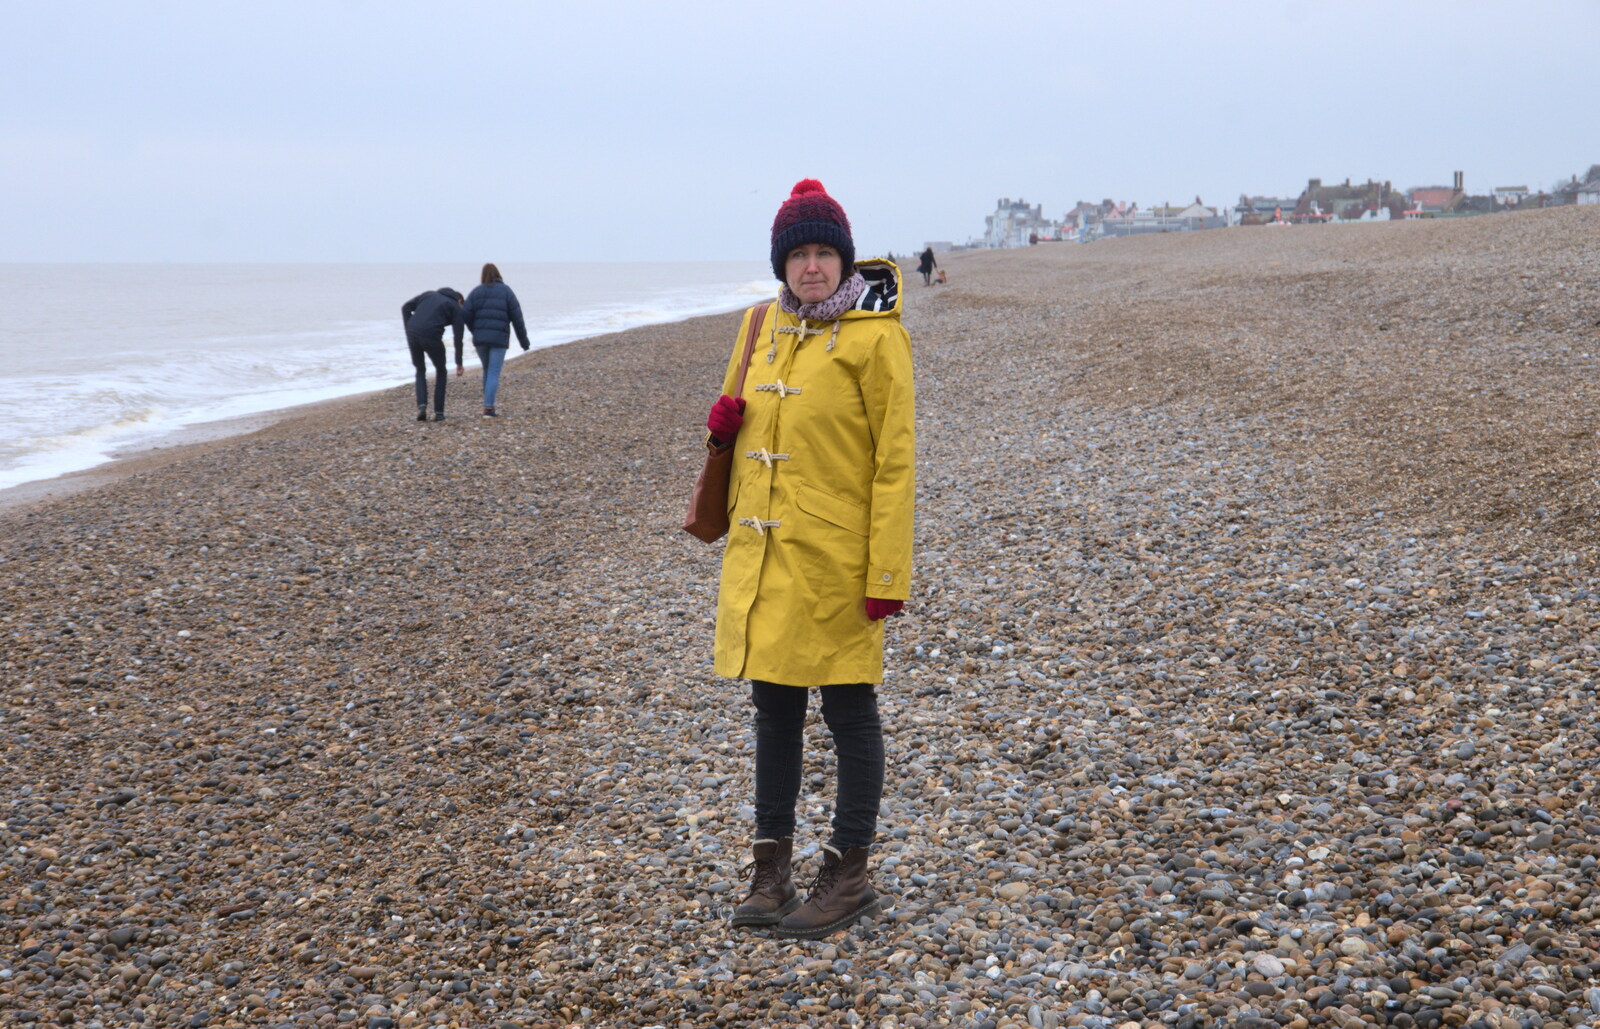 Isobel in a new coat from A Postcard from Aldeburgh, Suffolk - 6th January 2019